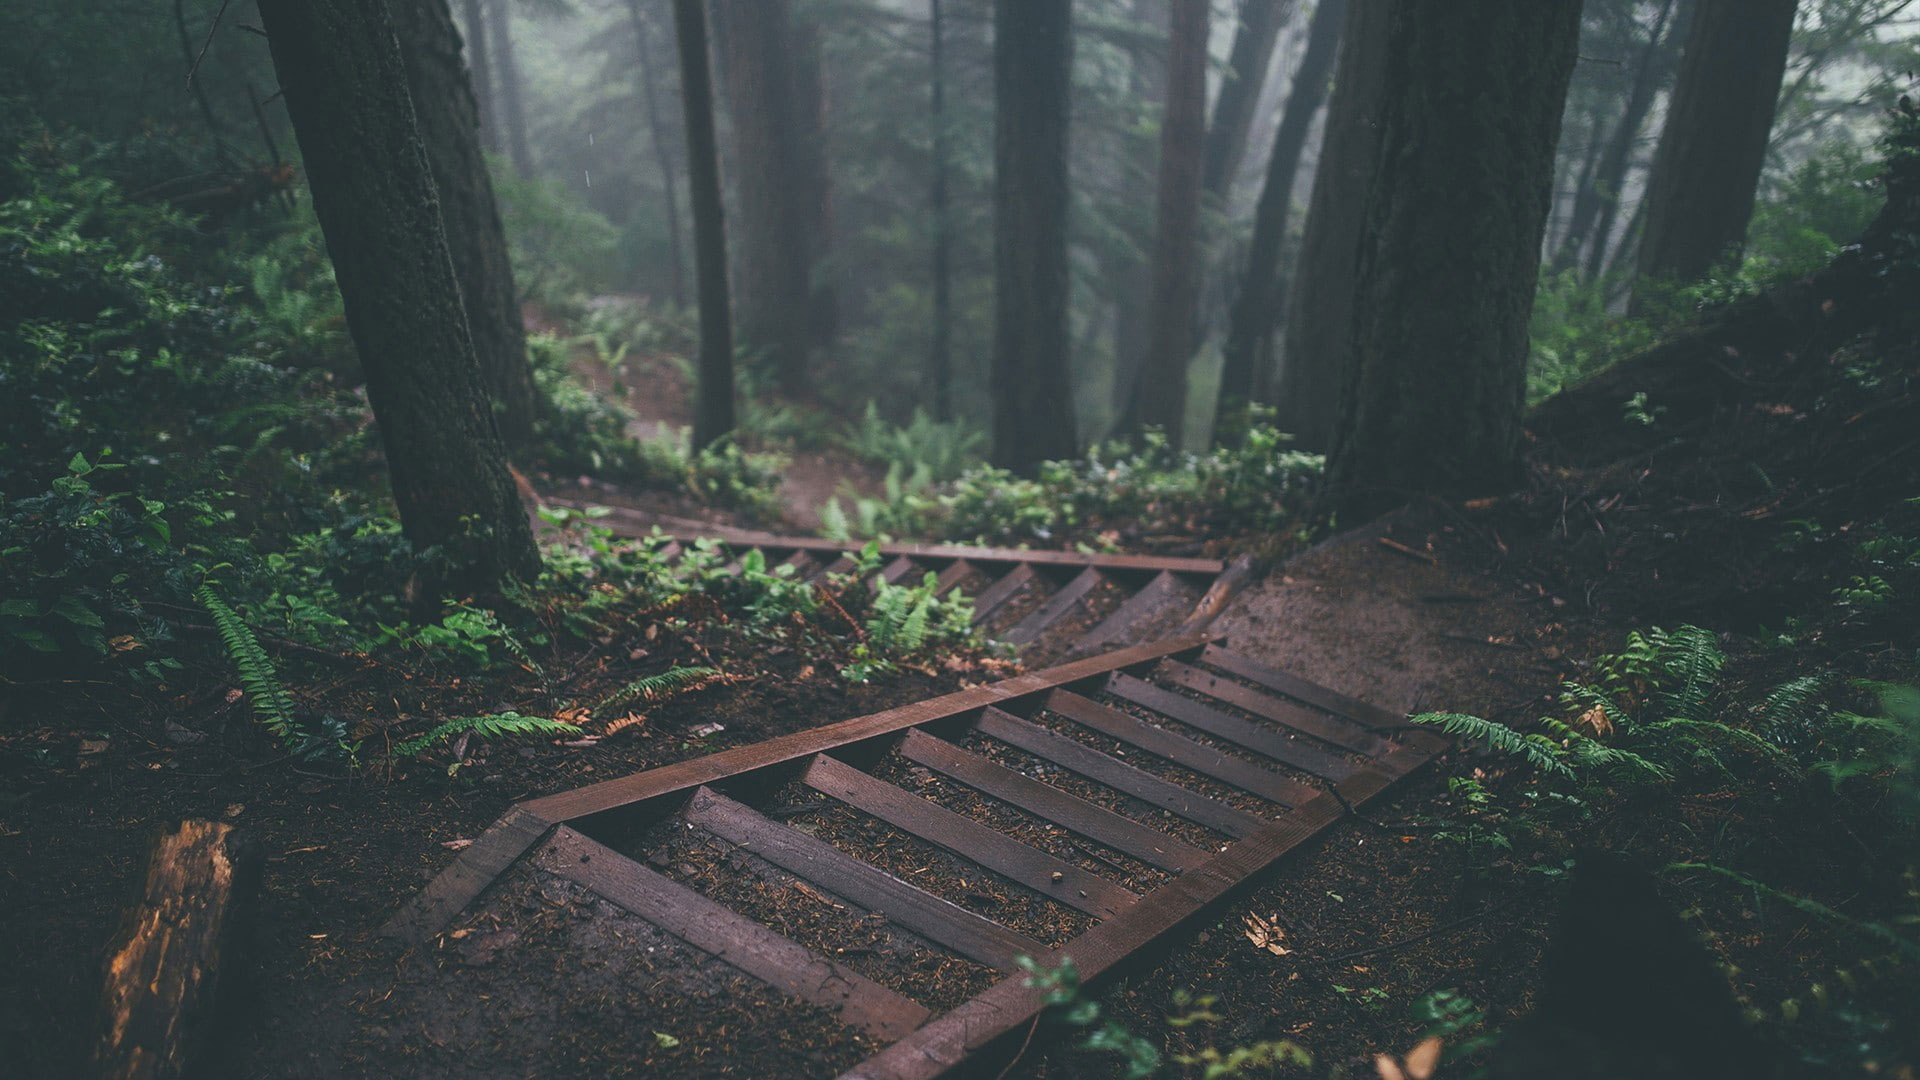 Trees wallpaper, stairs, deep forest, nature, plants, jungle